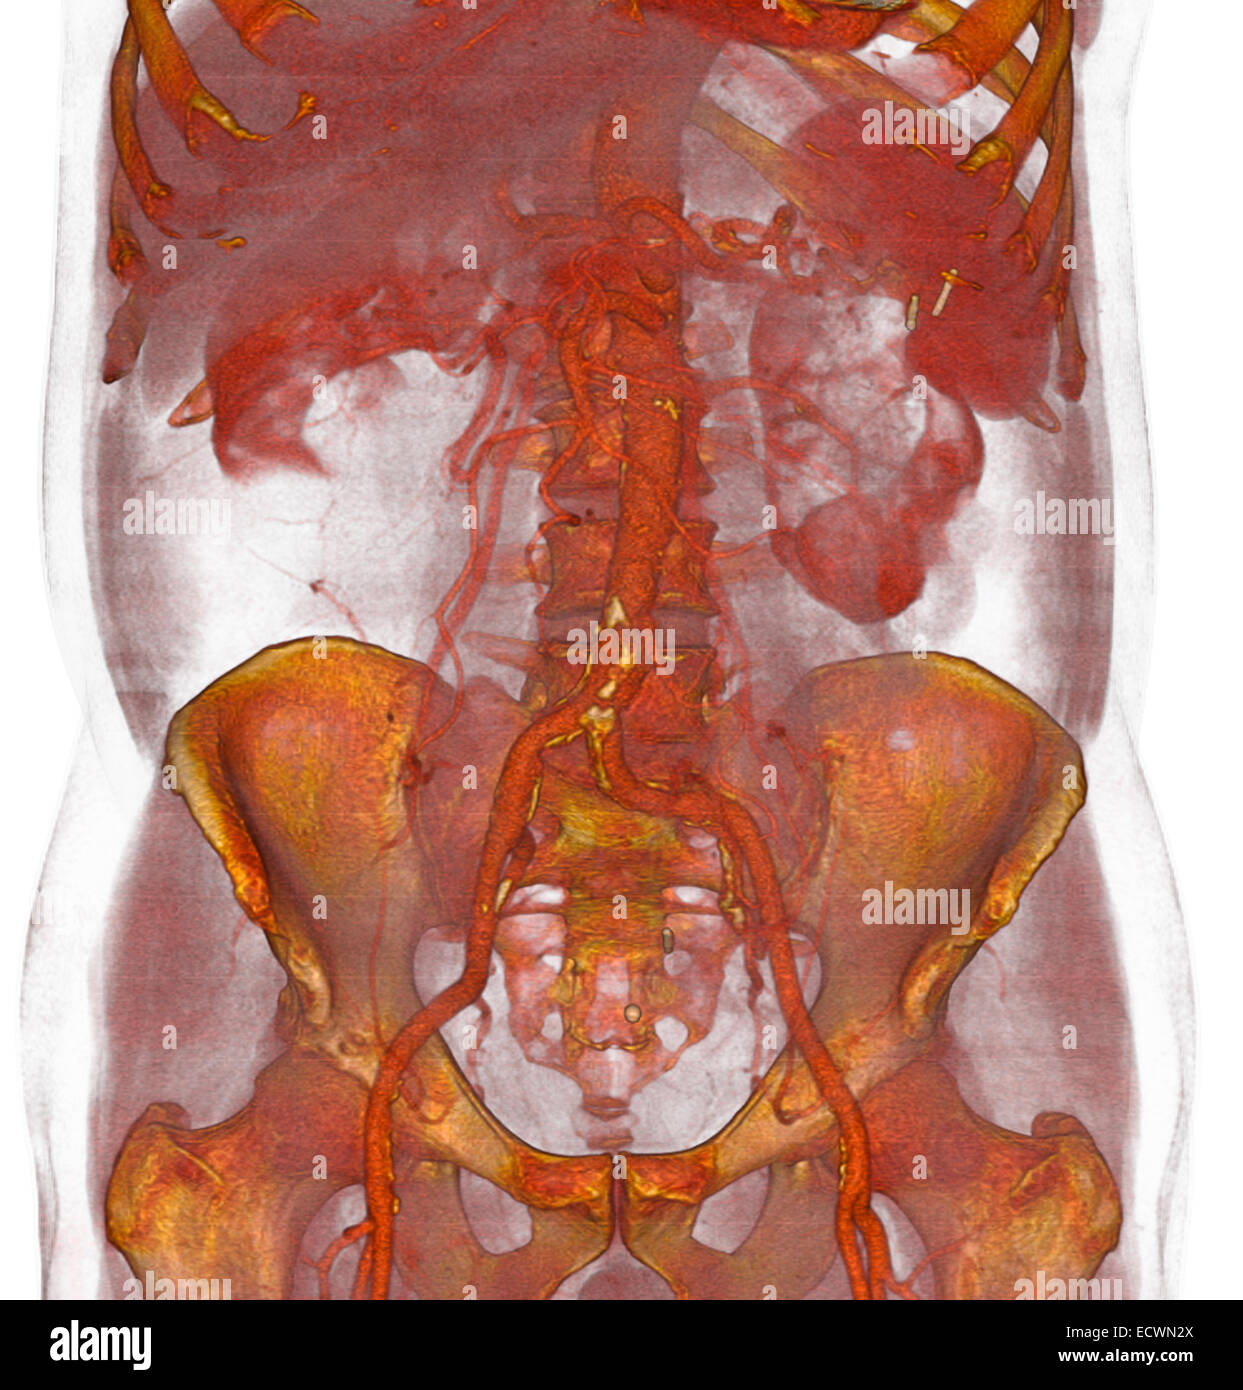 3D CT showing atherosclerotic plaque on the lower aorta. Stock Photo